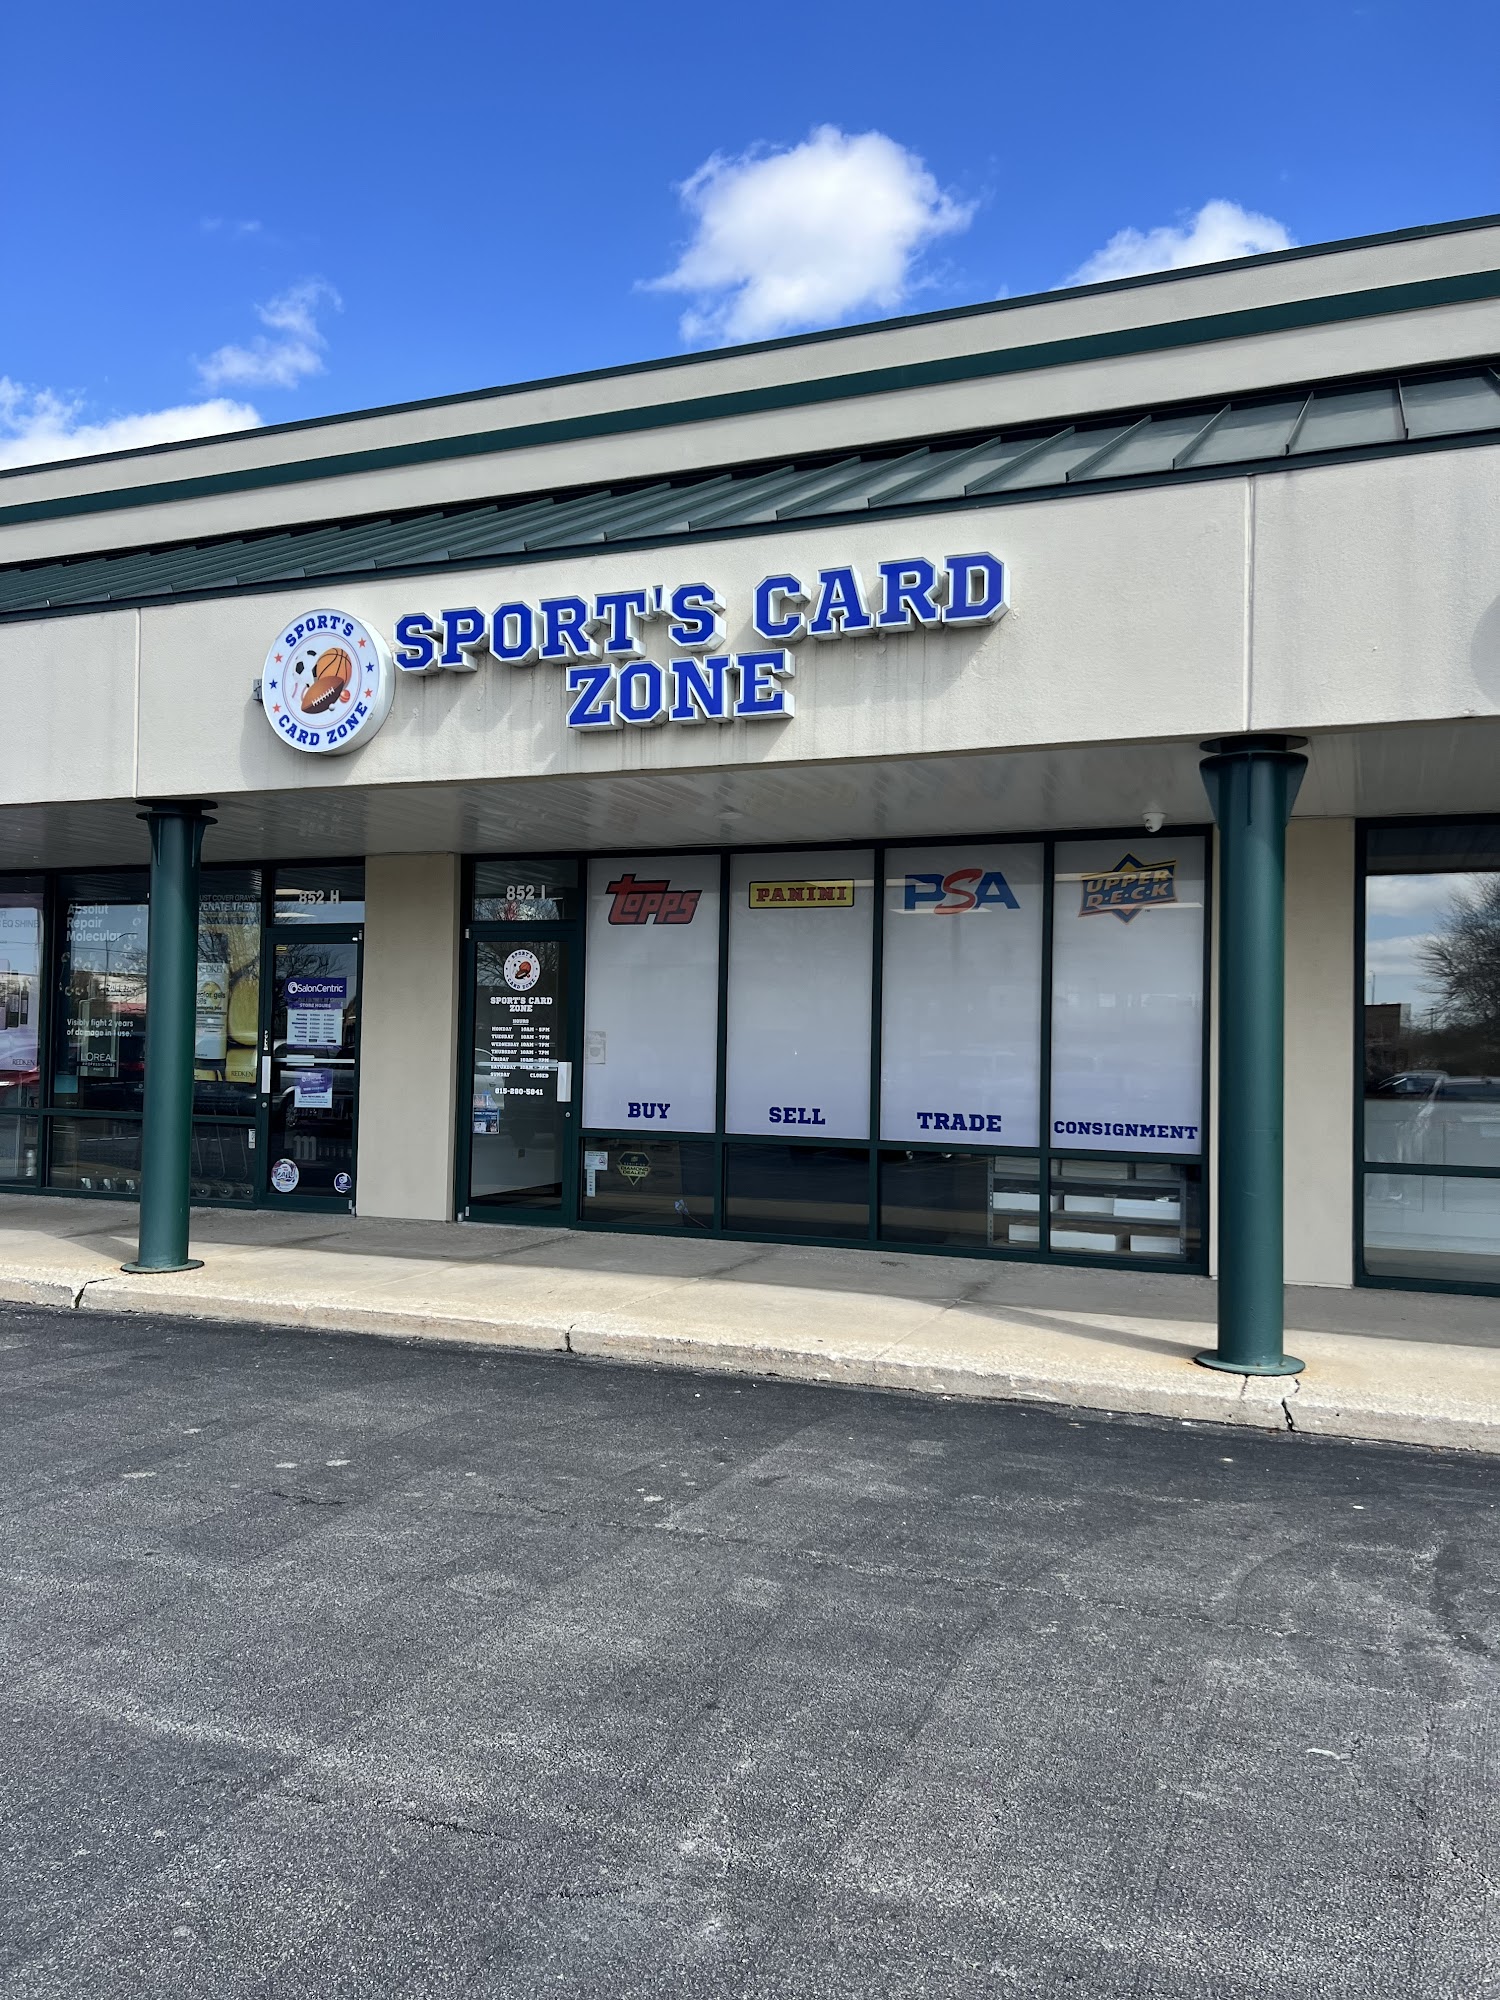 The Sport's Card Zone